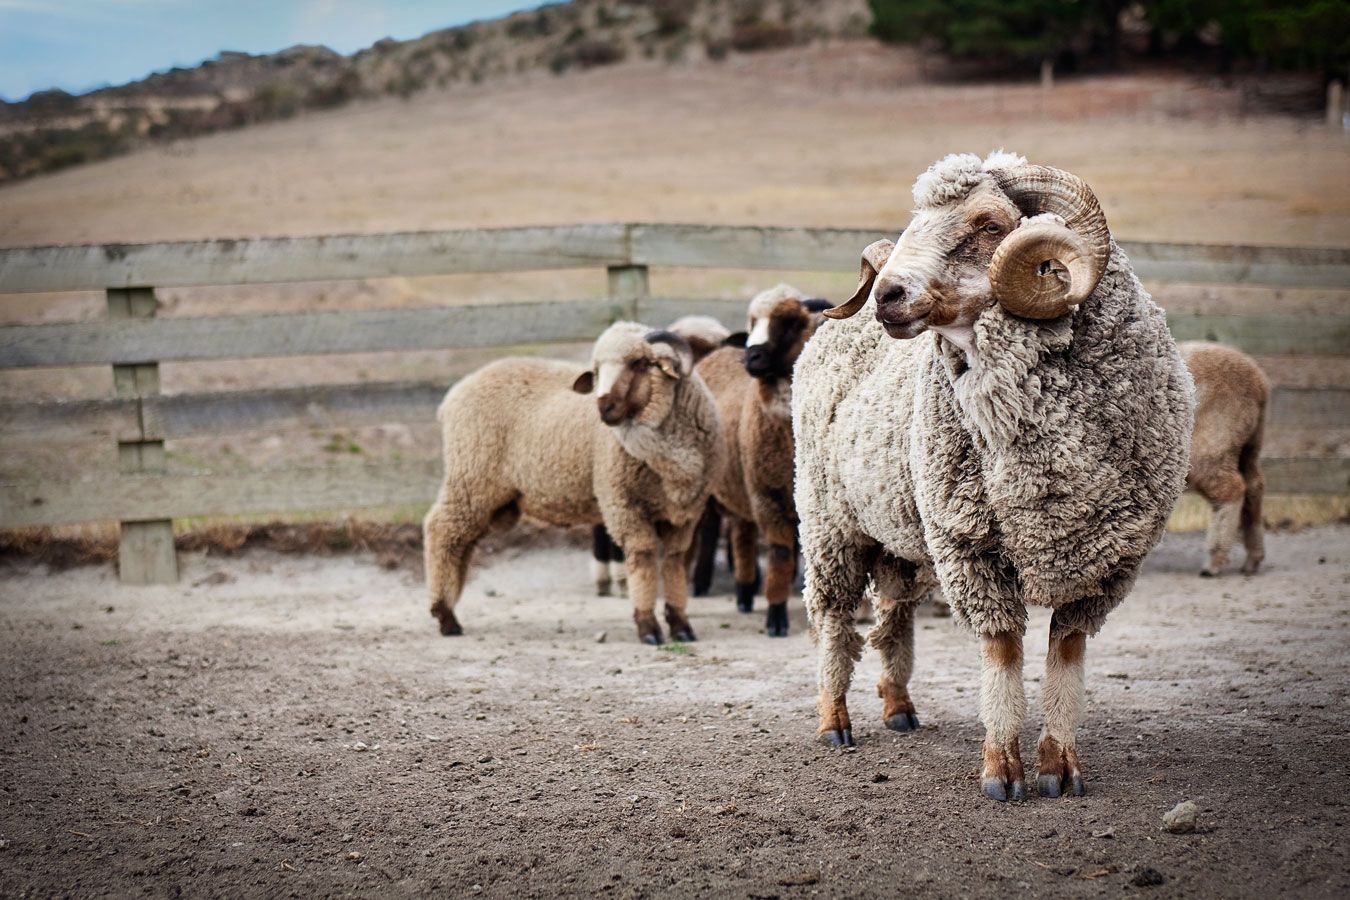 New Zealand merino story shot by Sharon Blance, Melbourne editorial and commercial photographer